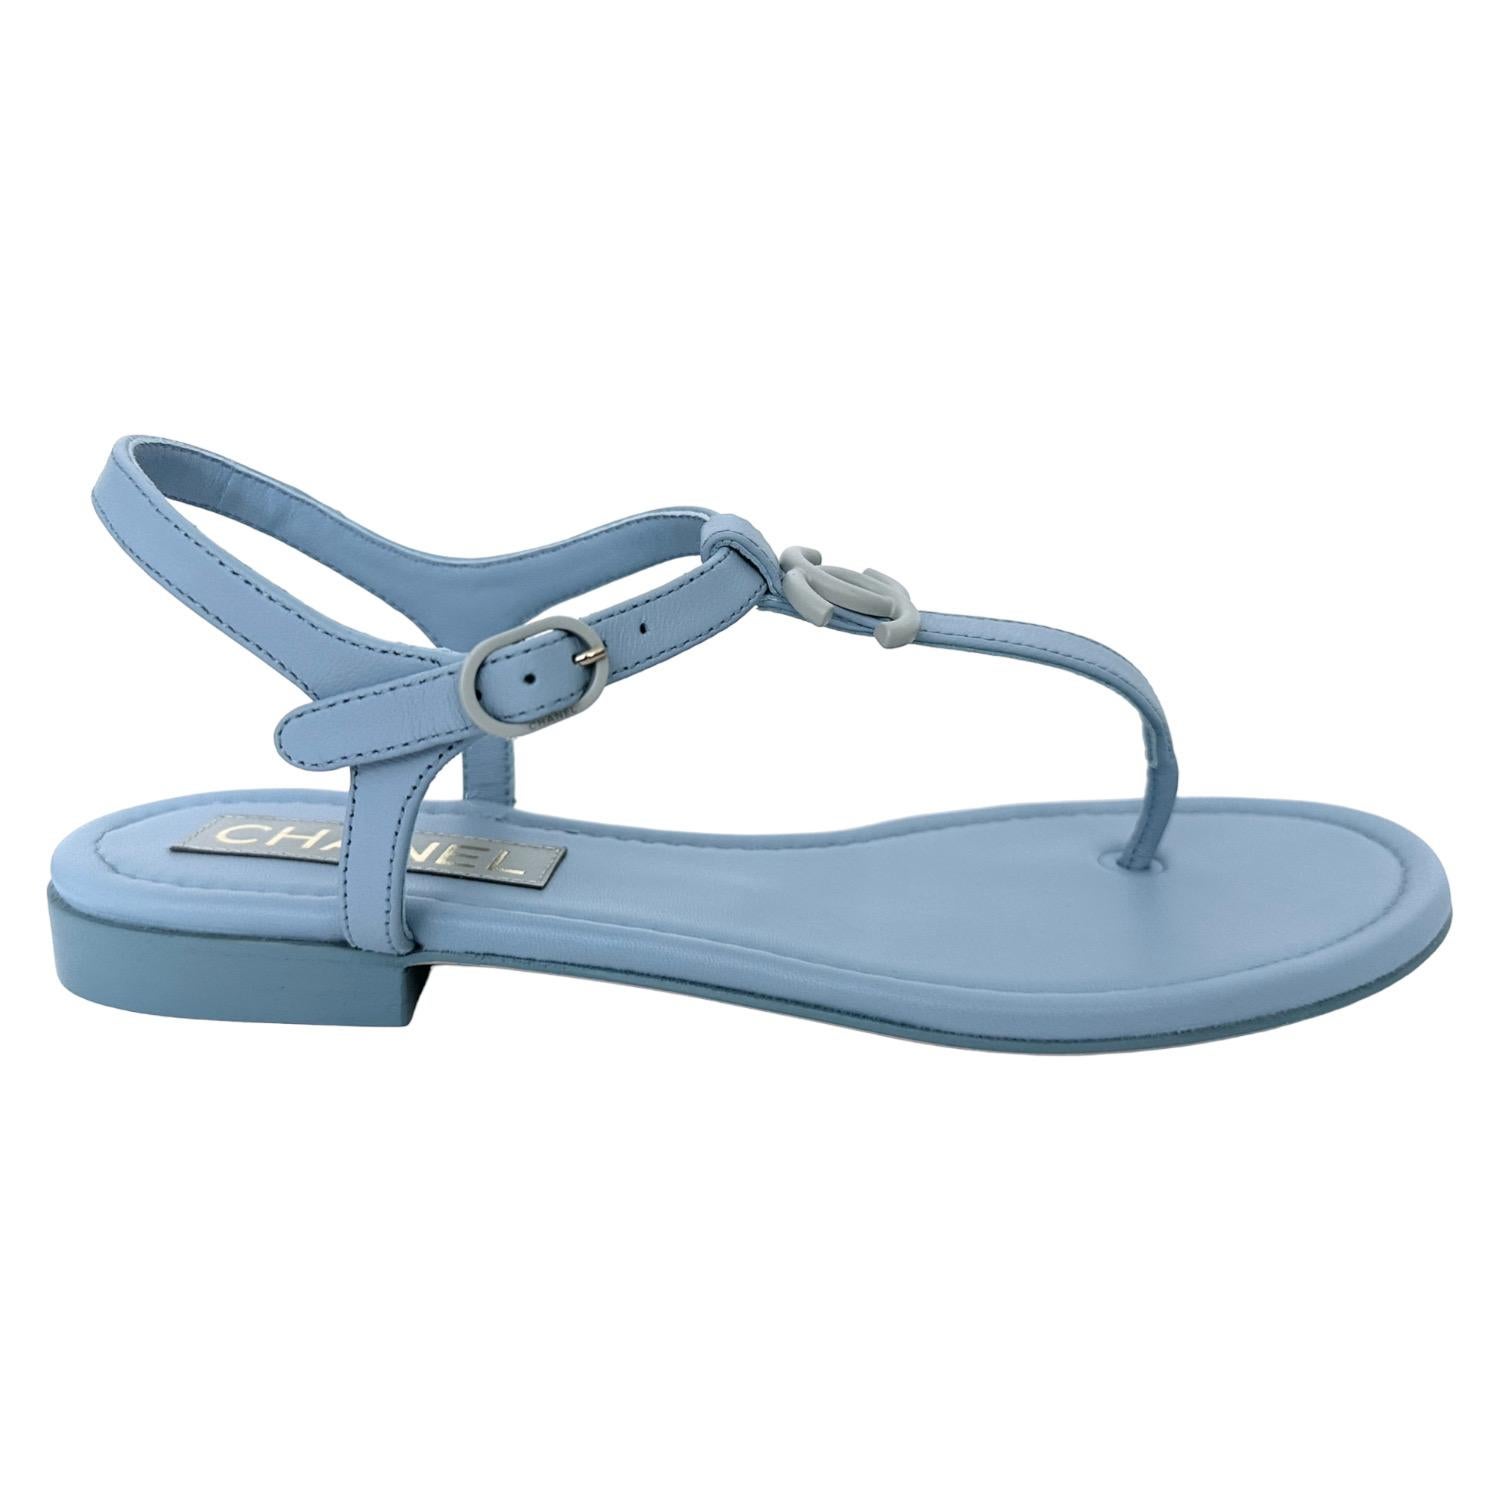 GUARANTEED AUTHENTIC CHANEL 2023 CC BLUE THONG SANDALS


Details:
- Blue leather thong style sandal.
- CC logo at vamp.
- Ankle strap, silver-tone metal signature buckle closure.
- Leather insole and sole.
- Comes with dust bag.

Size: